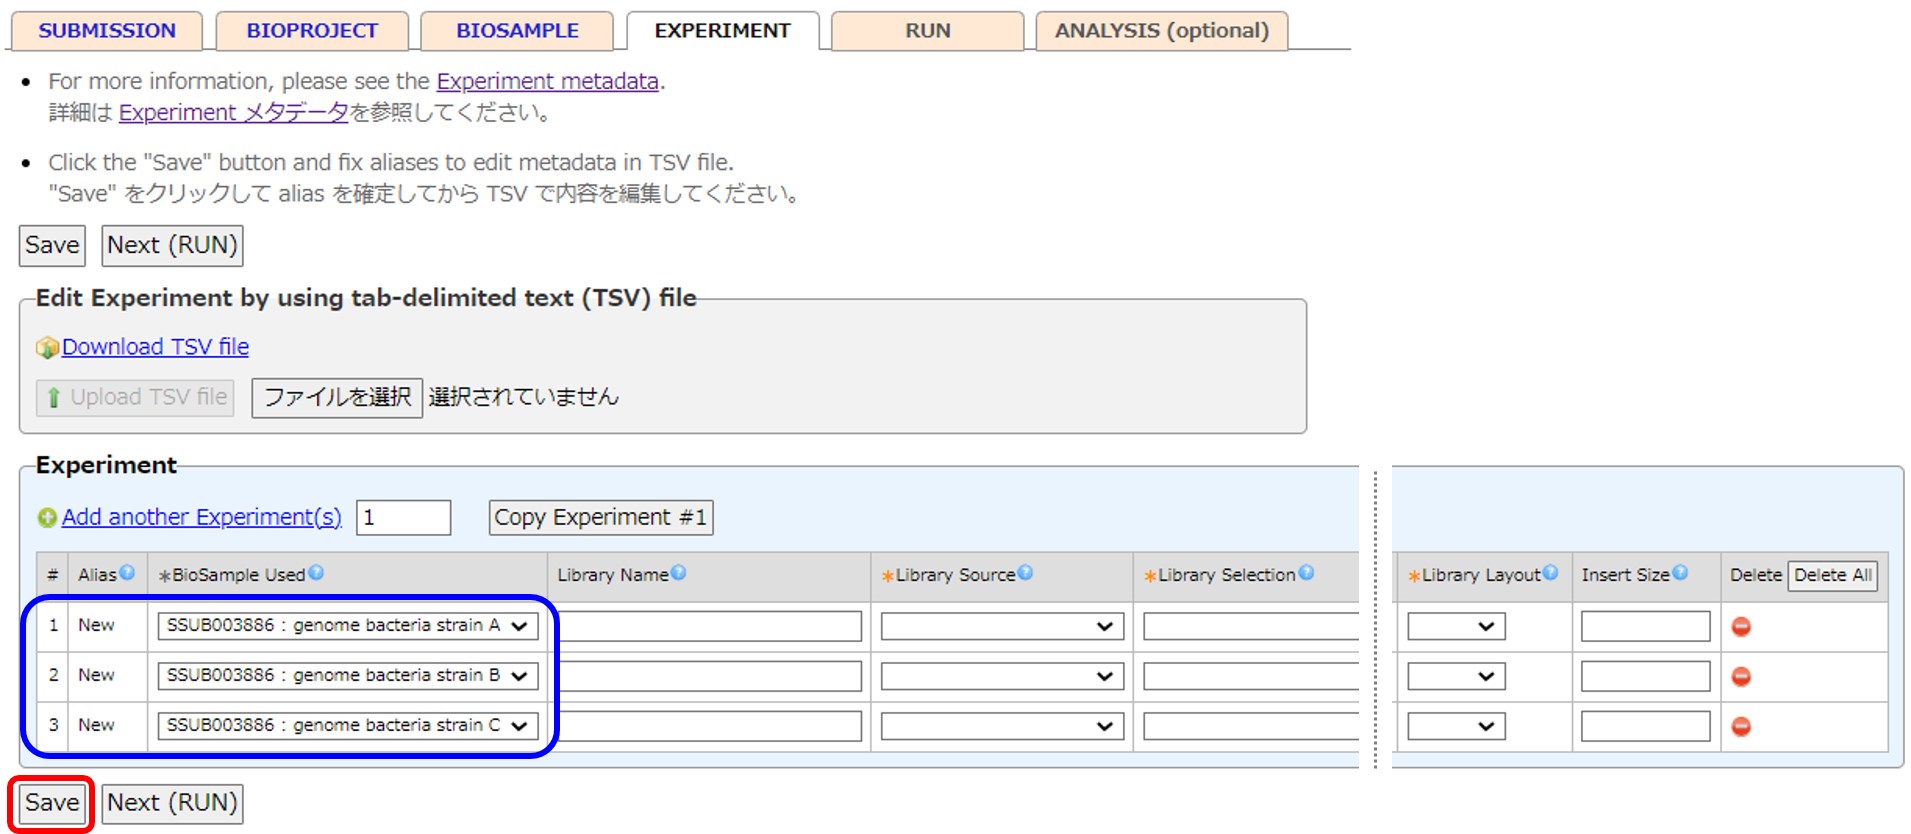 Experiment referencing selected BioSample, is automatically created